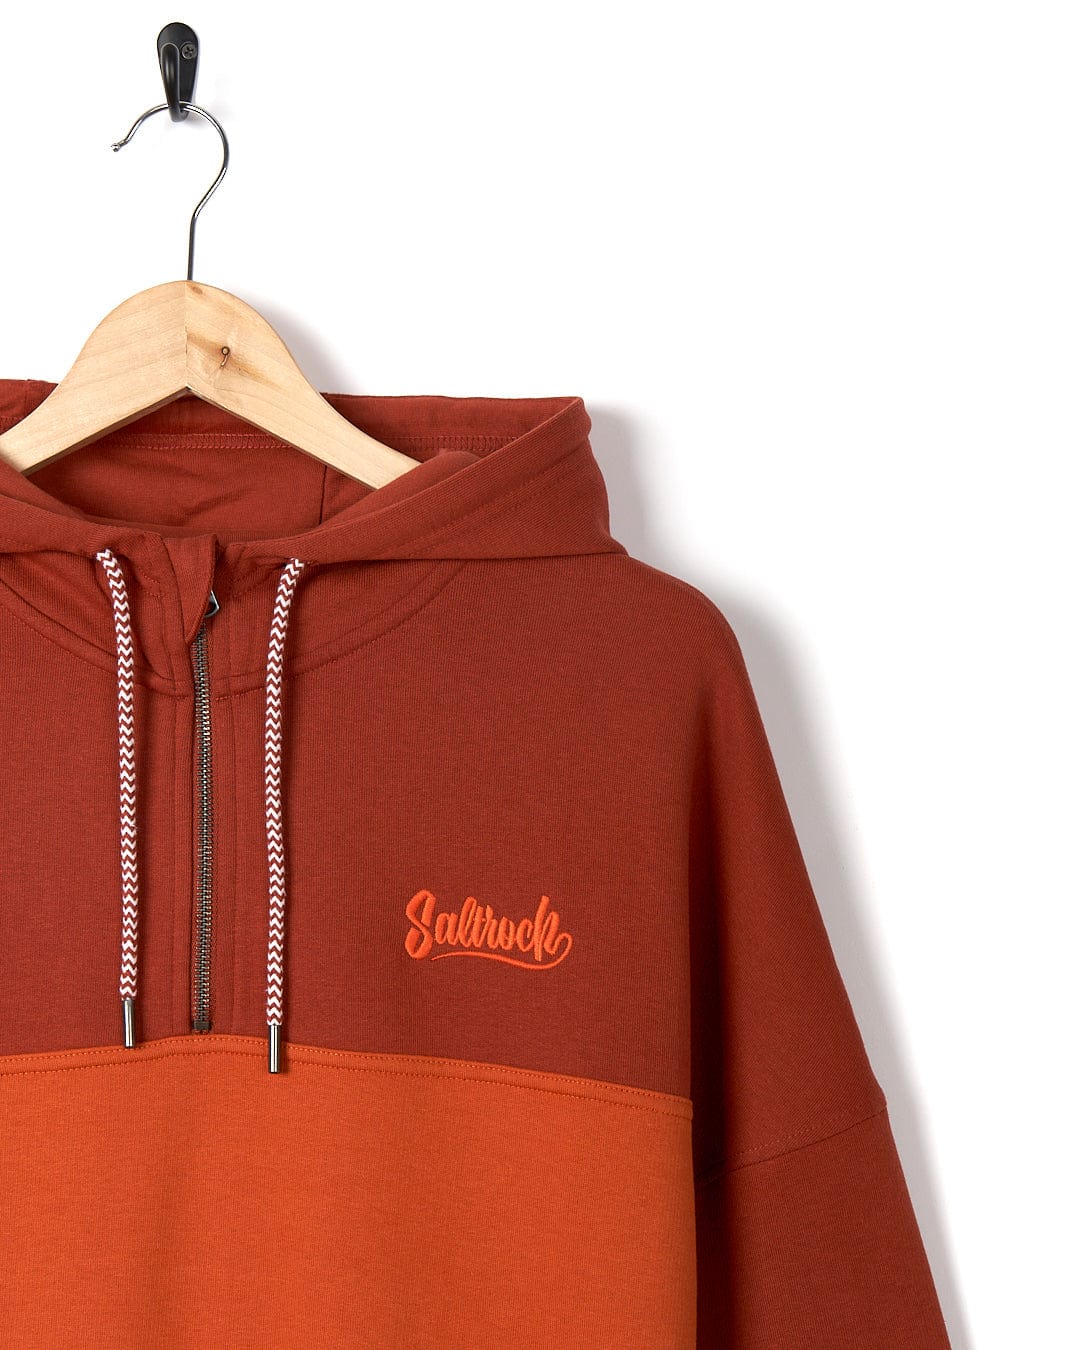 A Saltrock Speed Embroidery - Mens 1/4 Neck Zip - Red hooded sweatshirt hanging on a hanger.